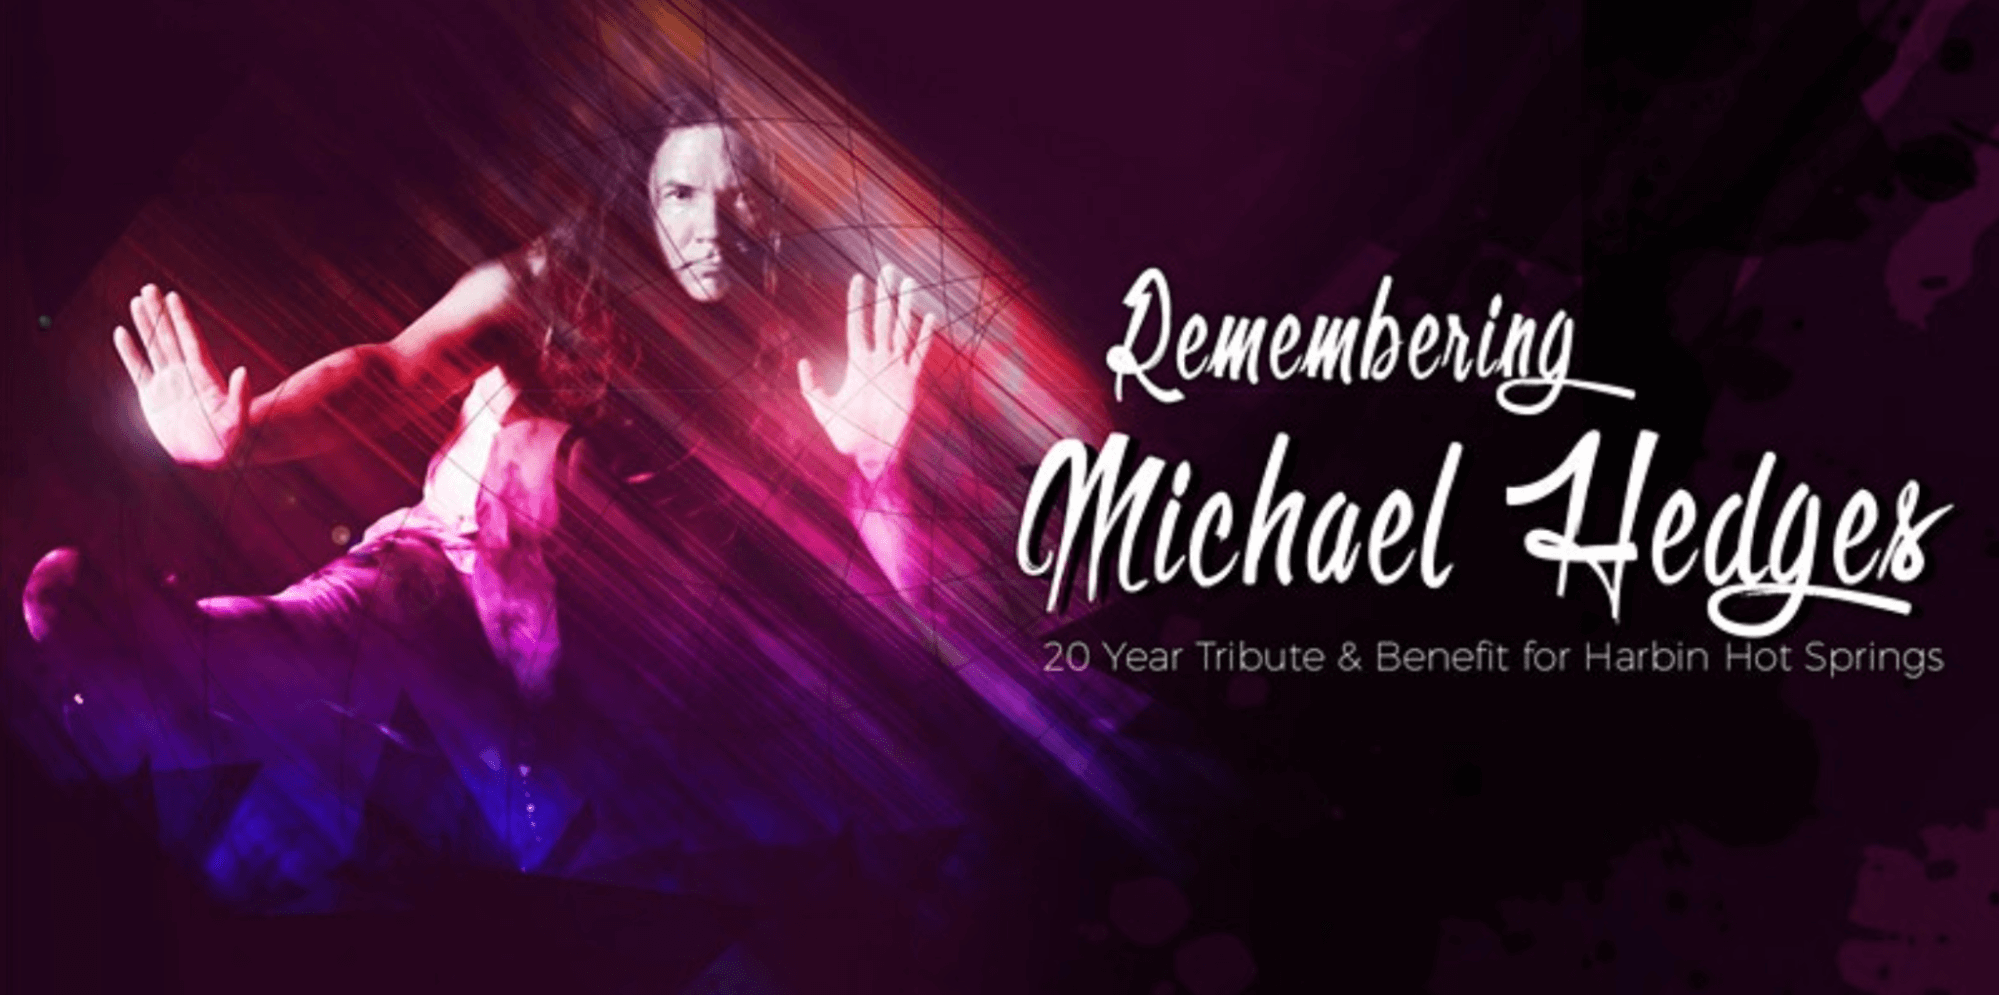 Graphic banner with photo of Michael and text: 'Remembering Michael Hedges'